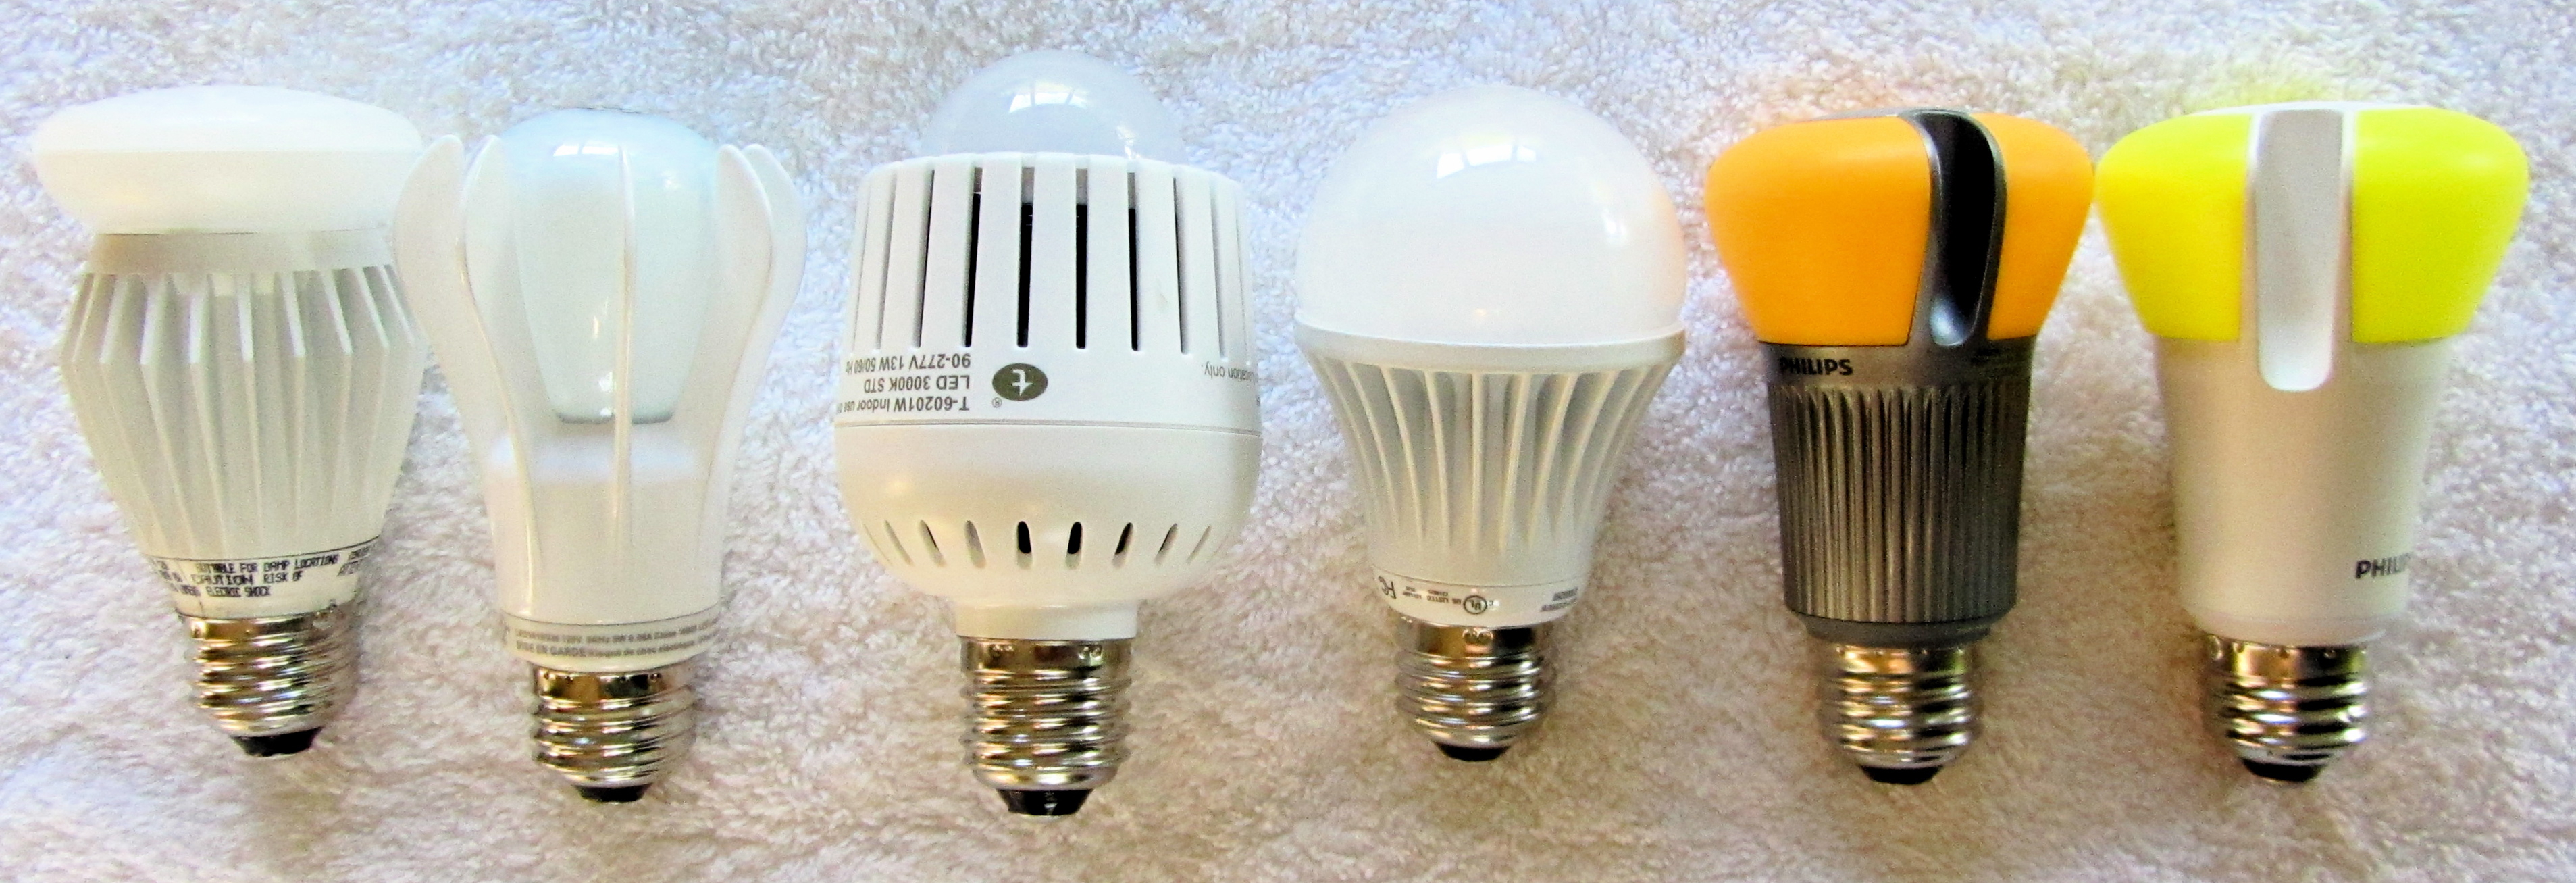 Led Light Bulbs For Home Iview Uview Review within dimensions 3814 X 1307